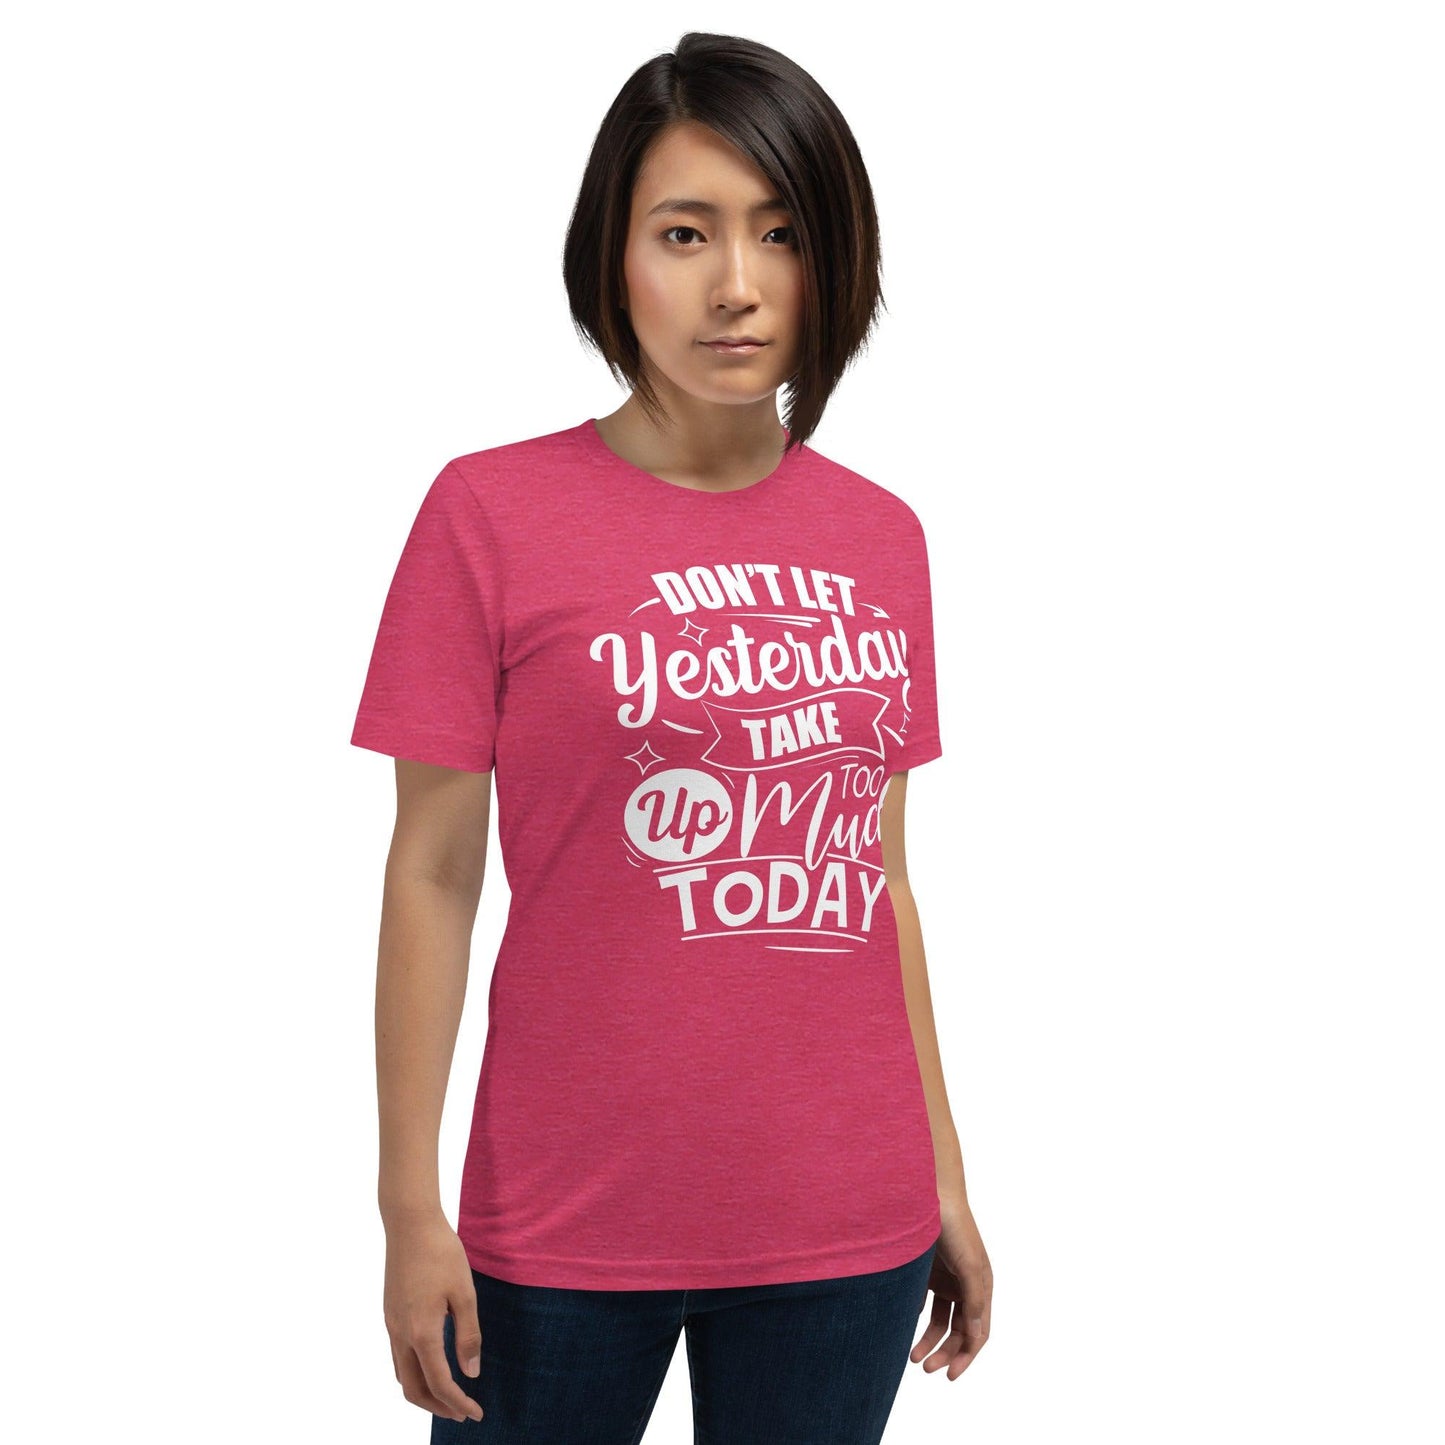 Don't Let Yesterday Take Too Much Today | Women's Shirt With Inspirational Quote - Affirm Effect